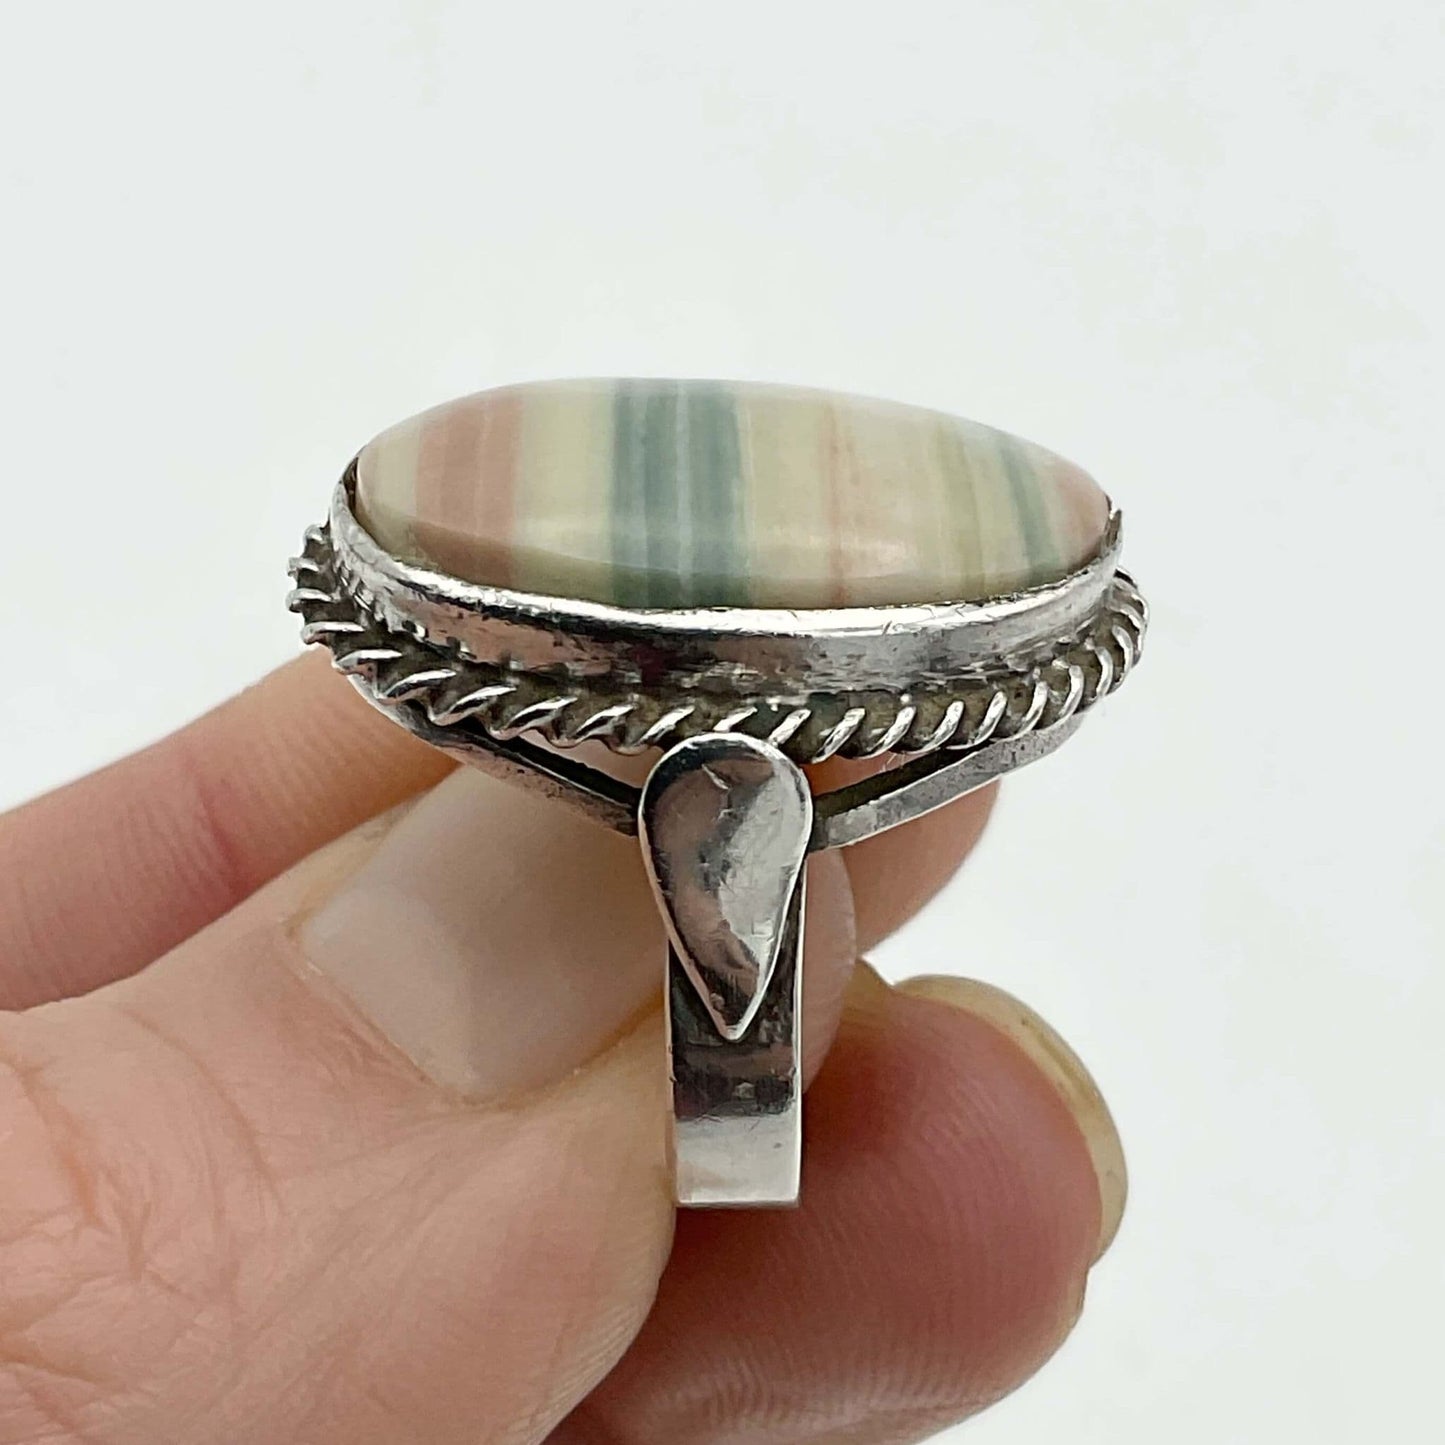 Banded Agate Silver Ring